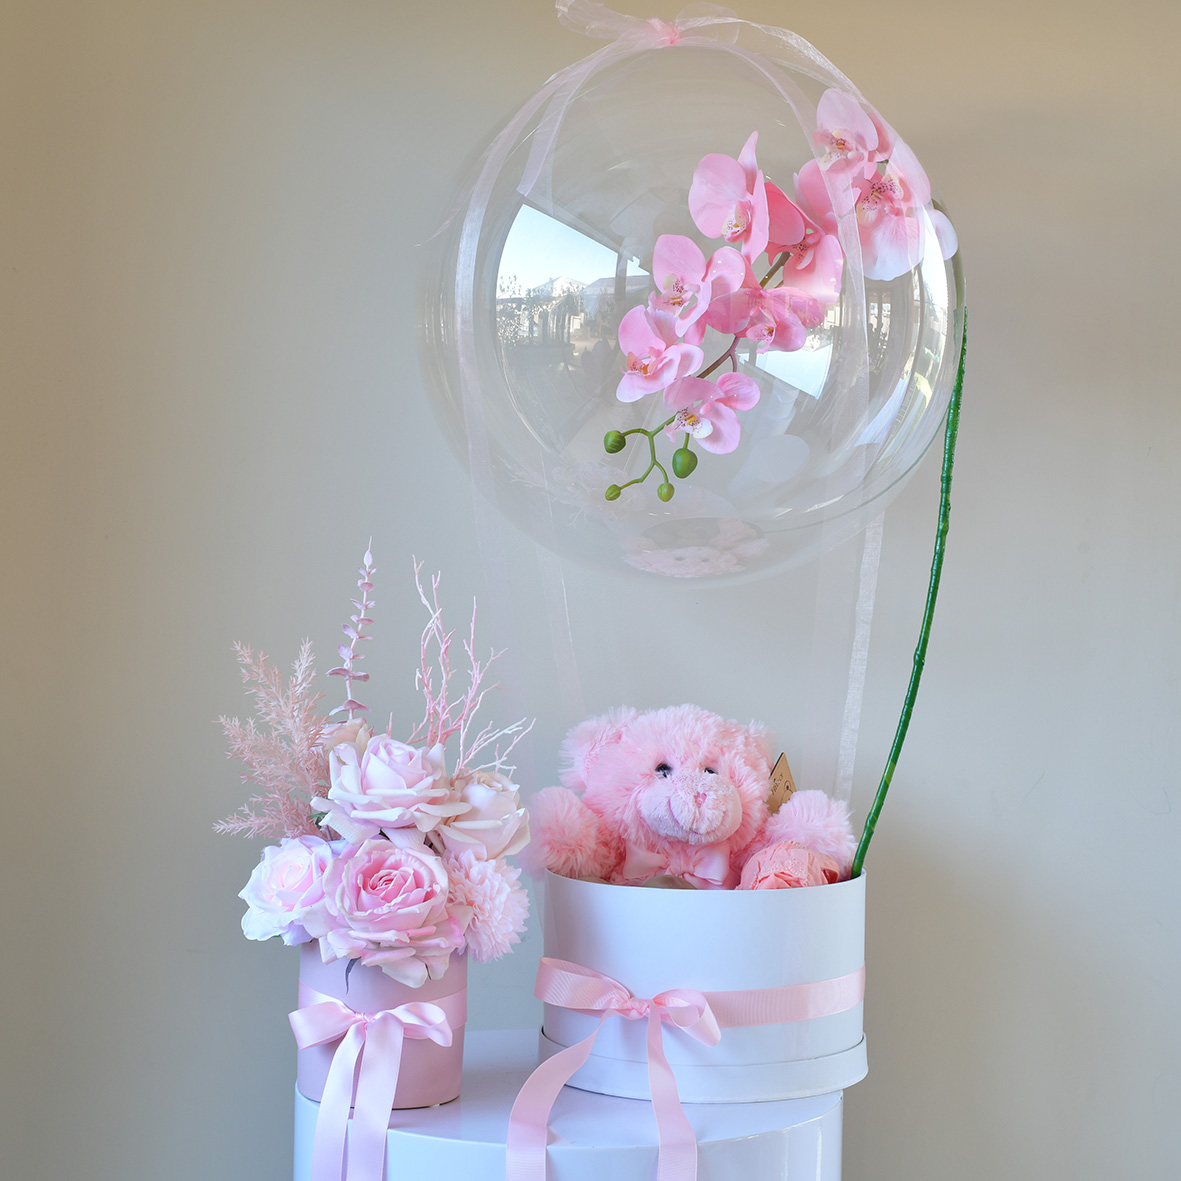 New Born Baby Hampers. Gifts and Flowers Sydney